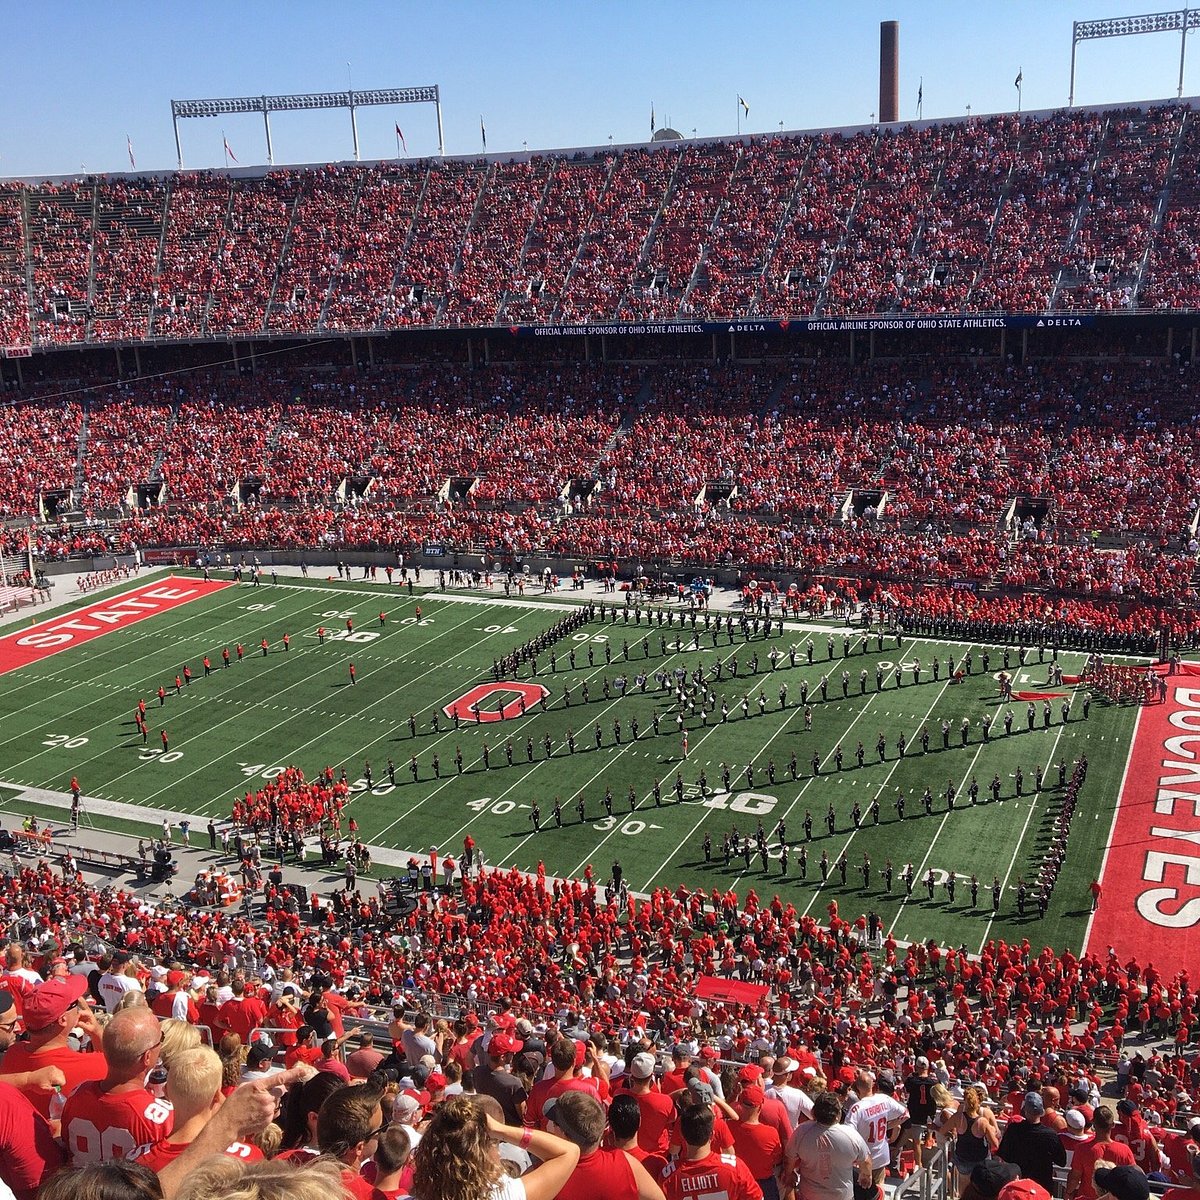 News to know when visiting Ohio Stadium in 2023